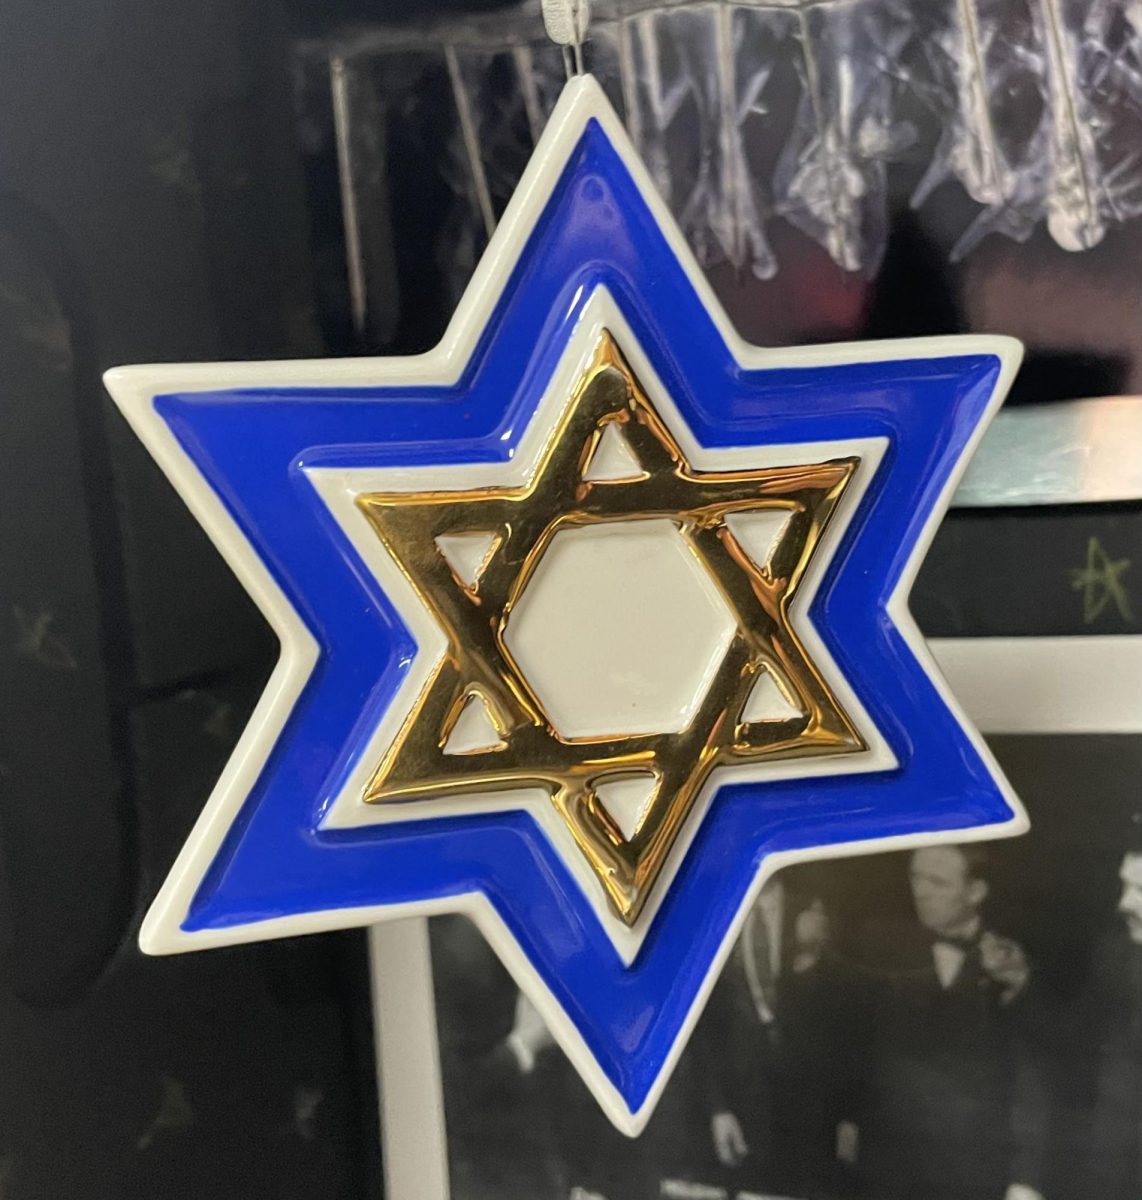 Image of the Star of David, an important symbol of Judaism.